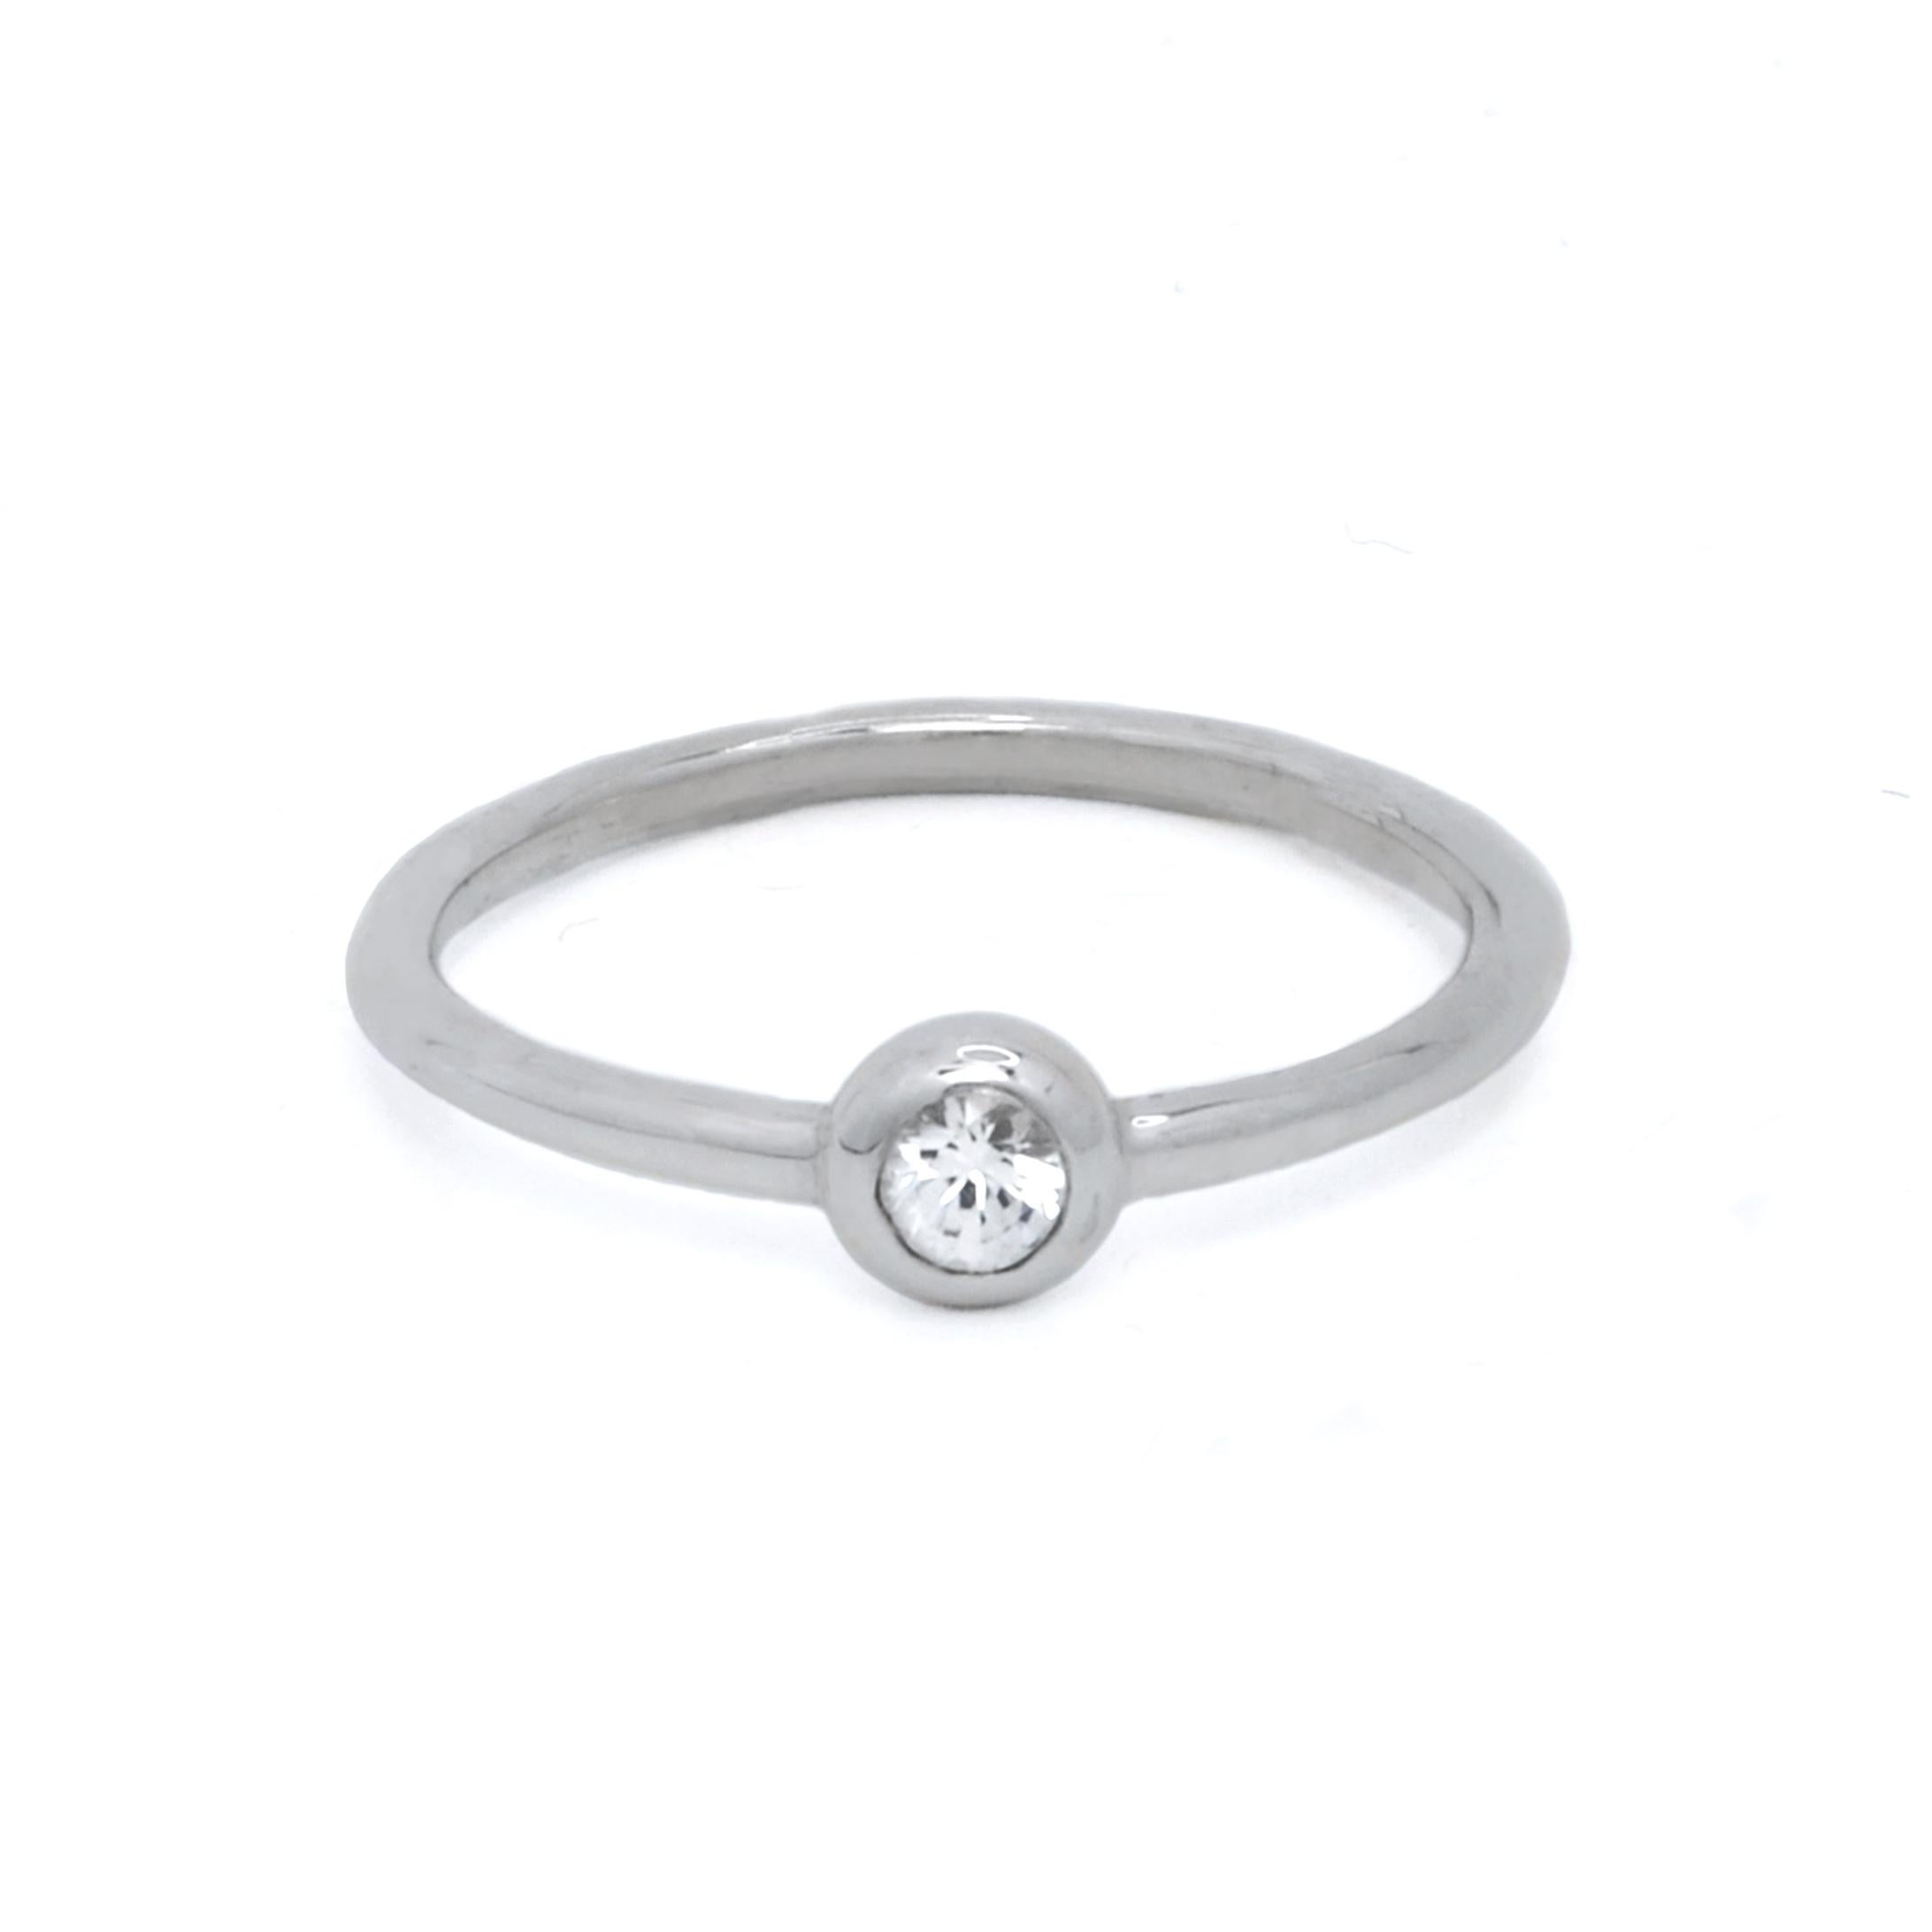 Ruth Nyc Ane Ring, Solitaire Diamond Ring in 14k White Gold